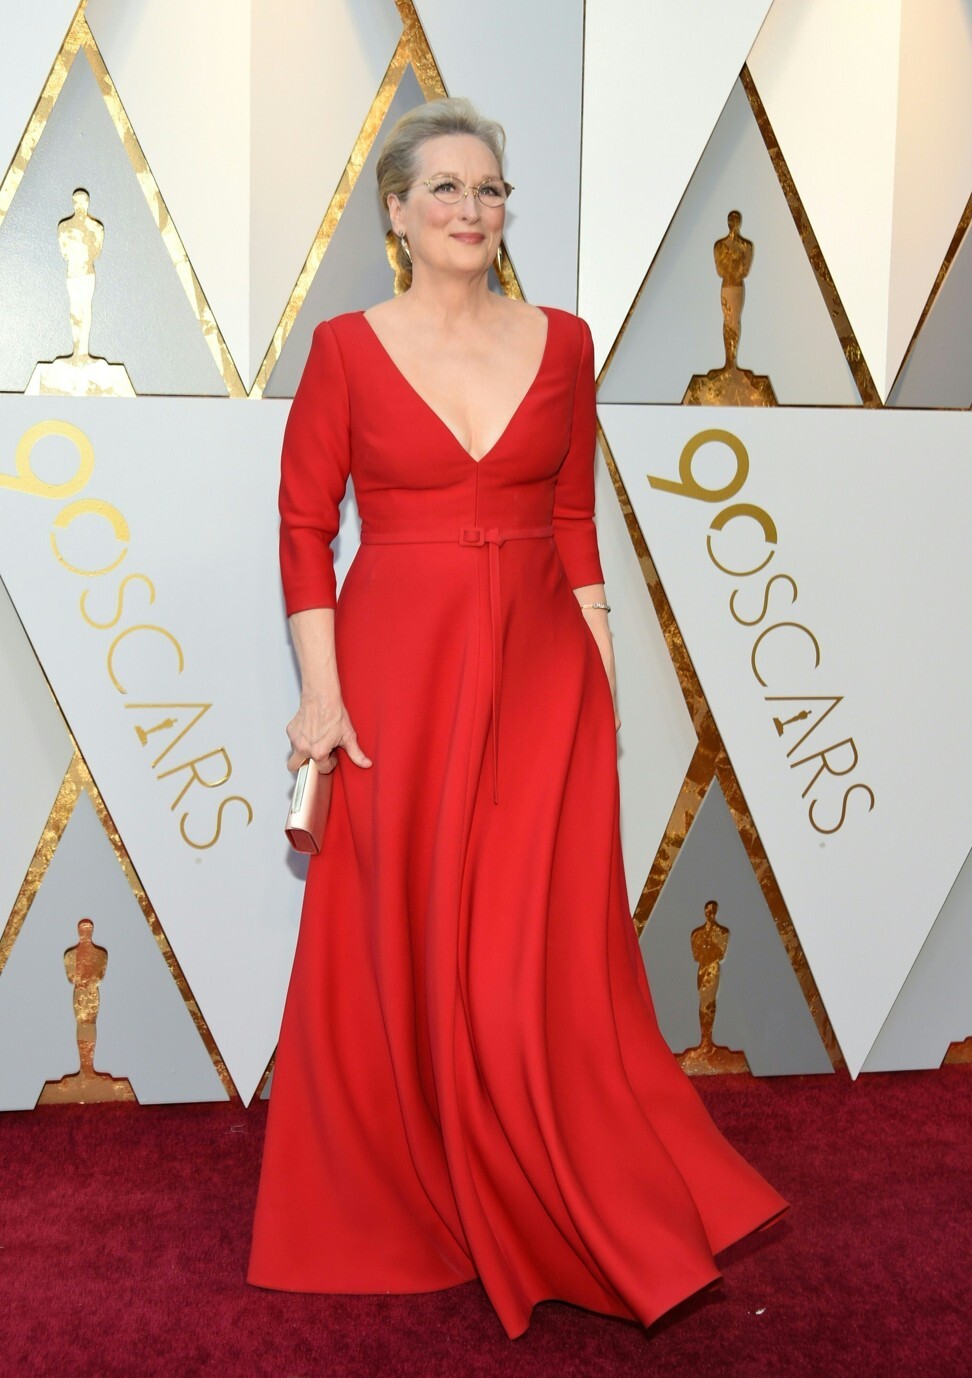 Actress Meryl Streep arrives for the 90th Annual Academy Awards in 2018. Photo: AFP